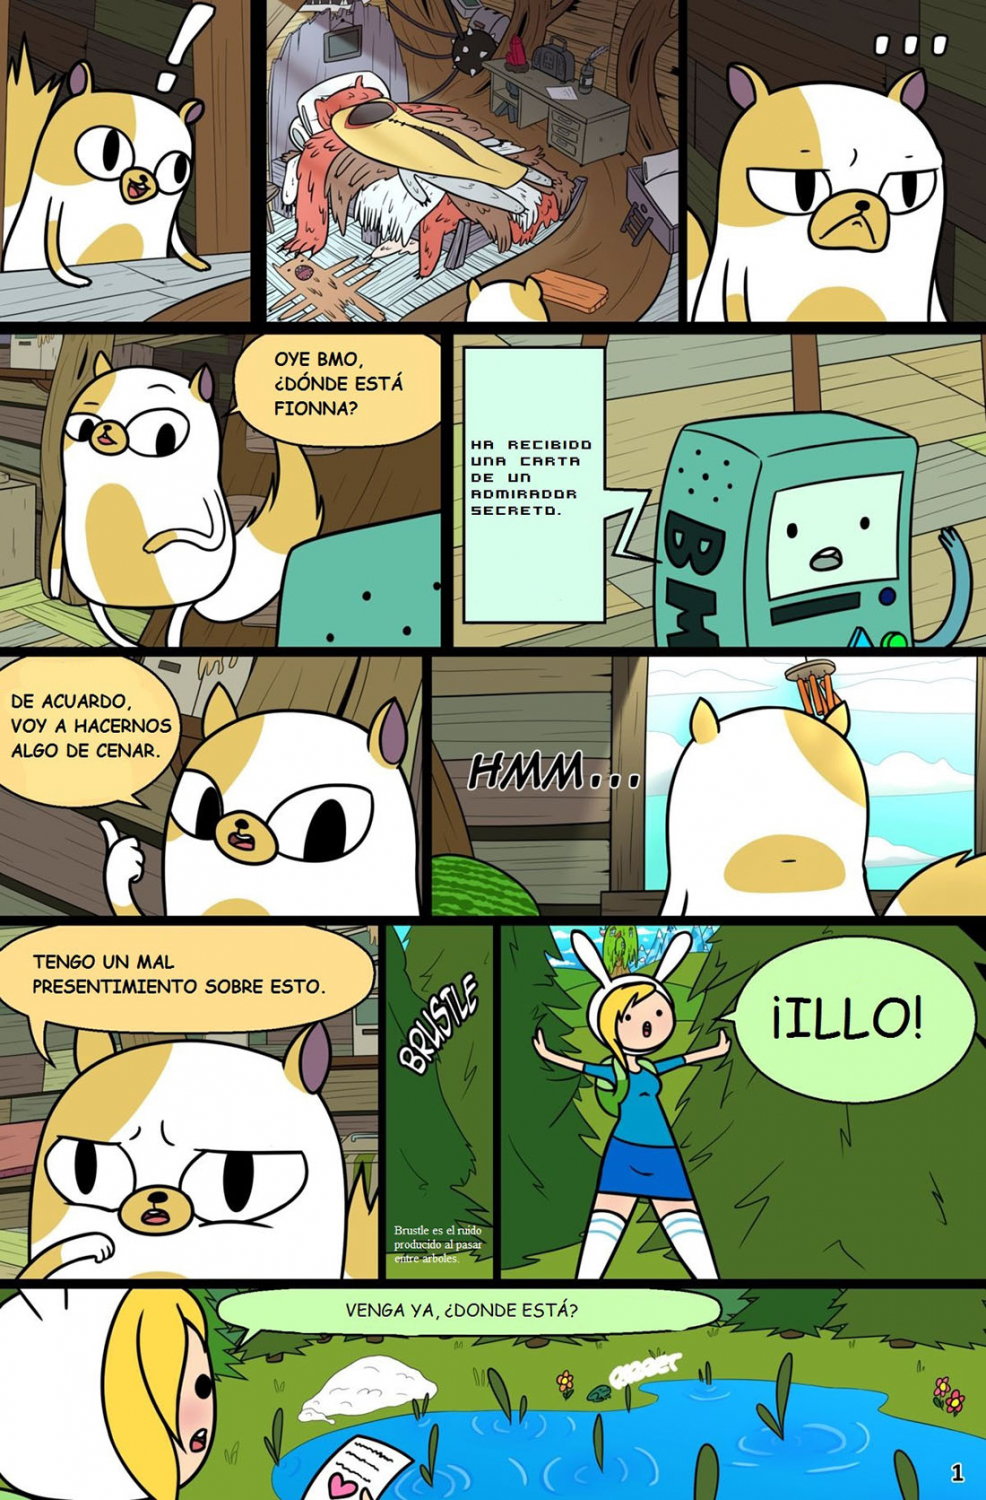 MisADVENTURE - Time Spring Special [Cubbychambers]